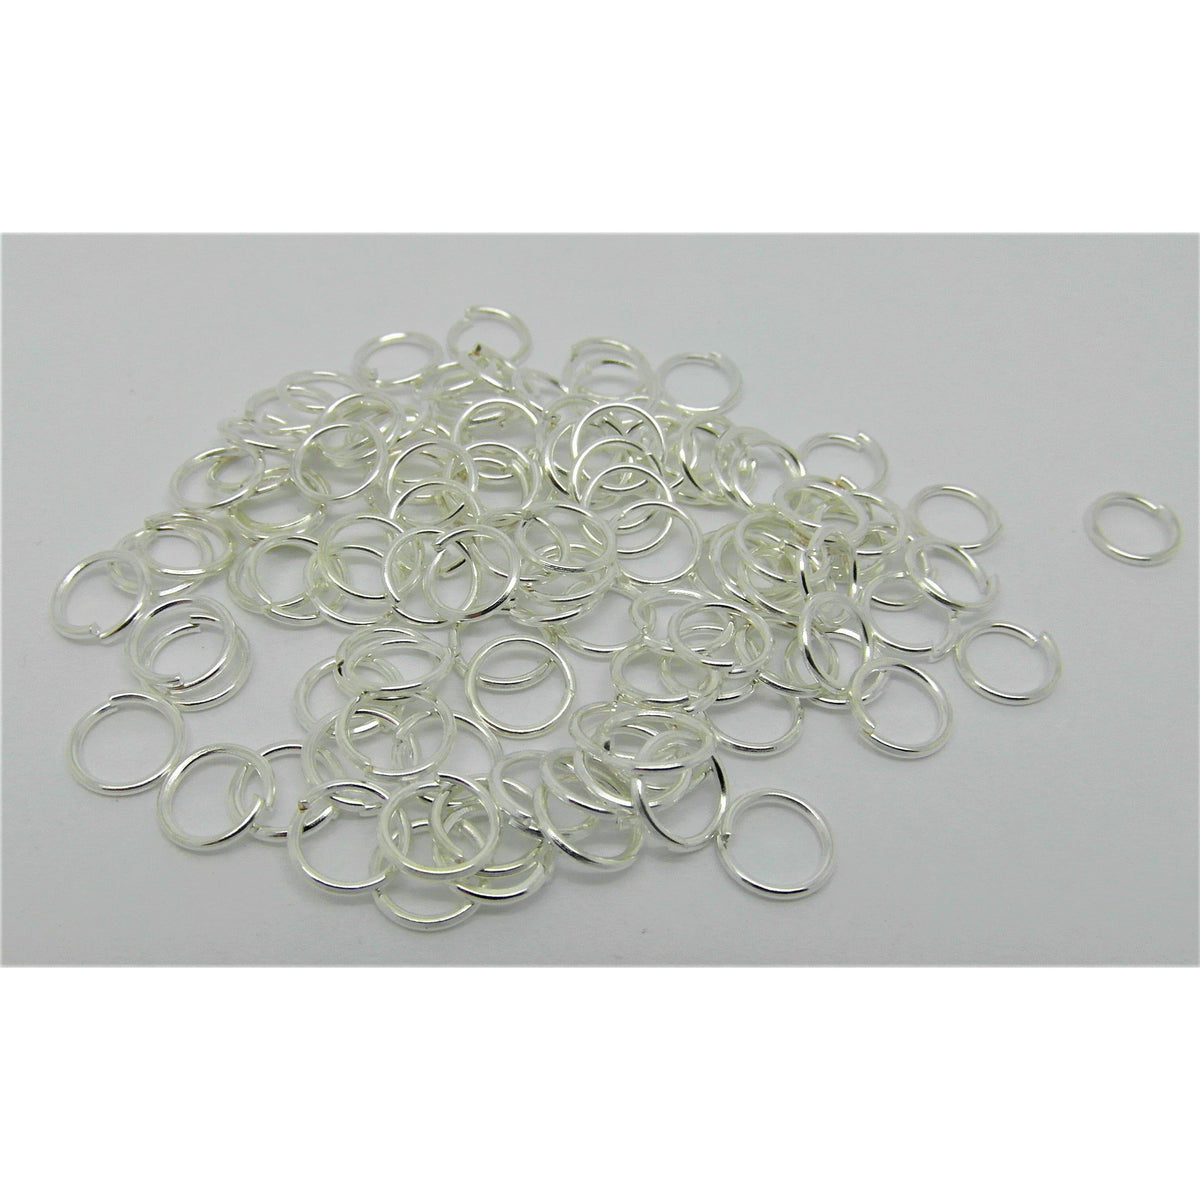 6mm Silver Plated OPEN JUMP RINGS